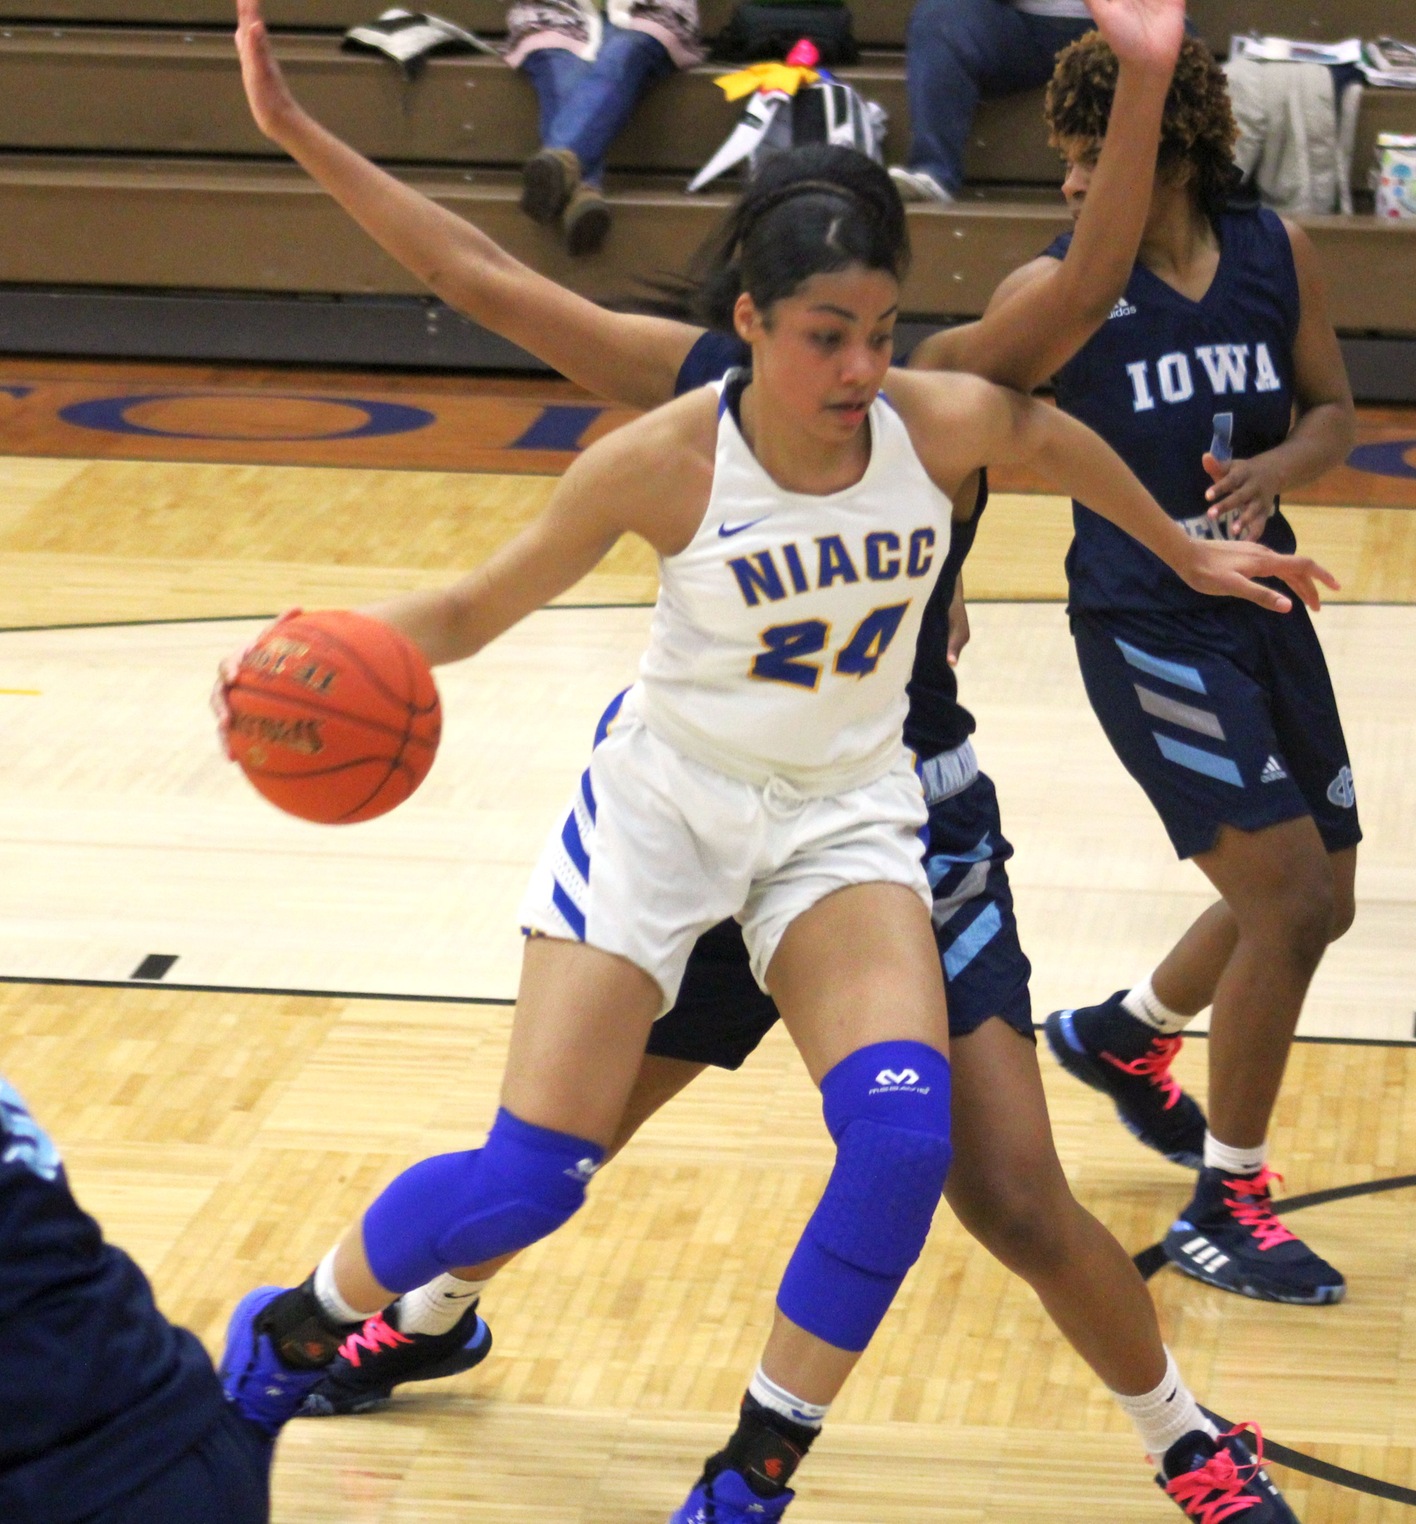 Sierra Morrow drives to the basket in Wednesday's win over Iowa Central.